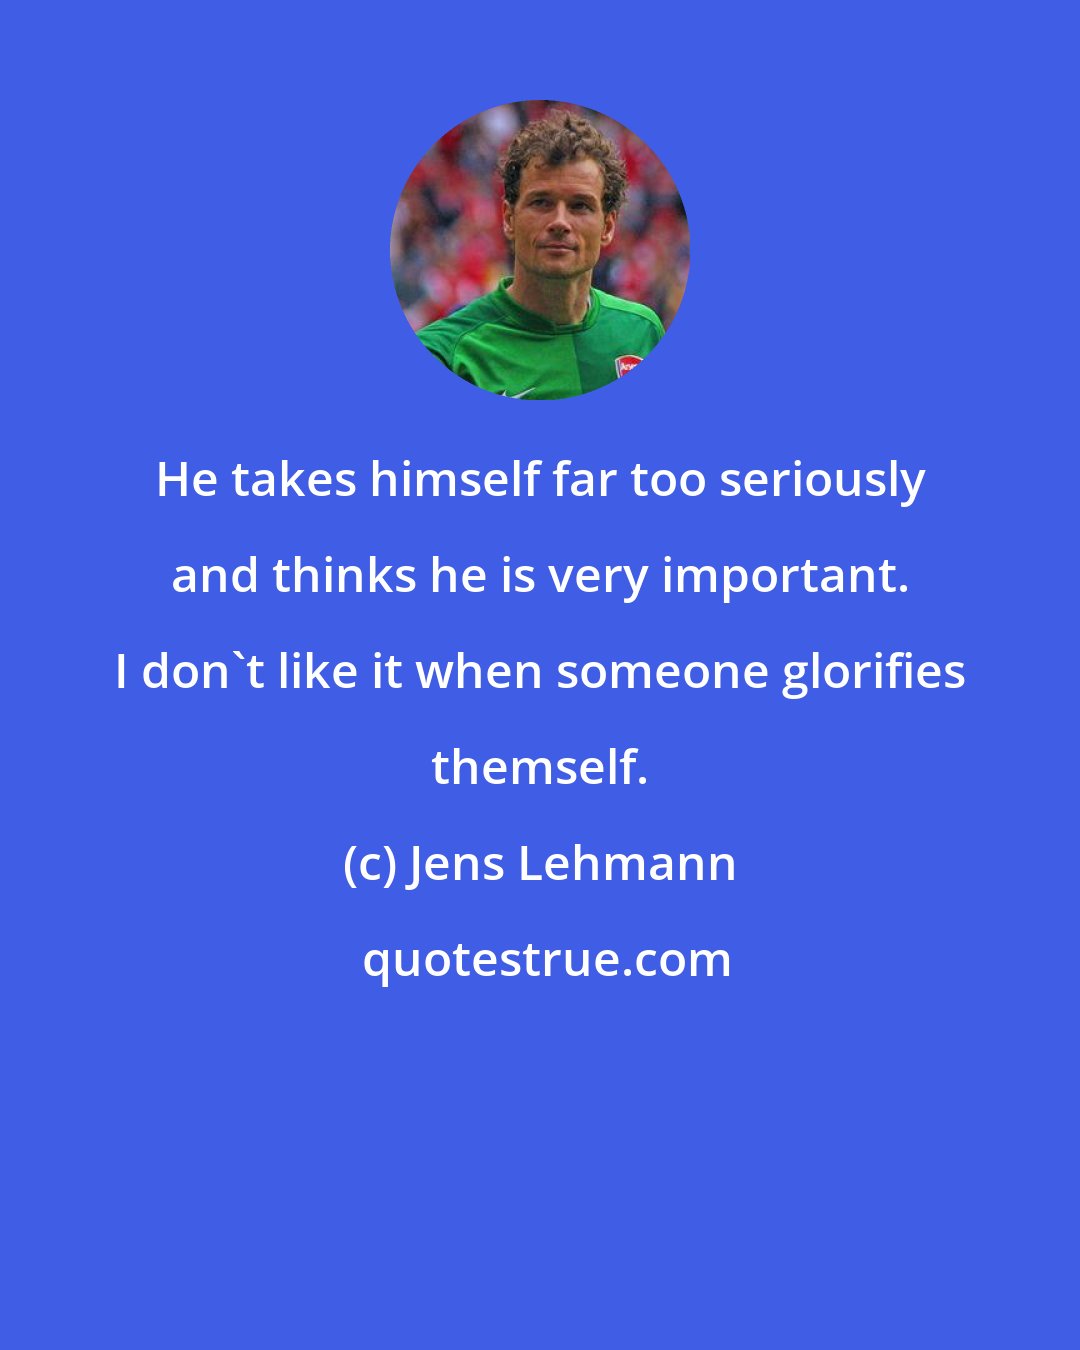 Jens Lehmann: He takes himself far too seriously and thinks he is very important. I don't like it when someone glorifies themself.